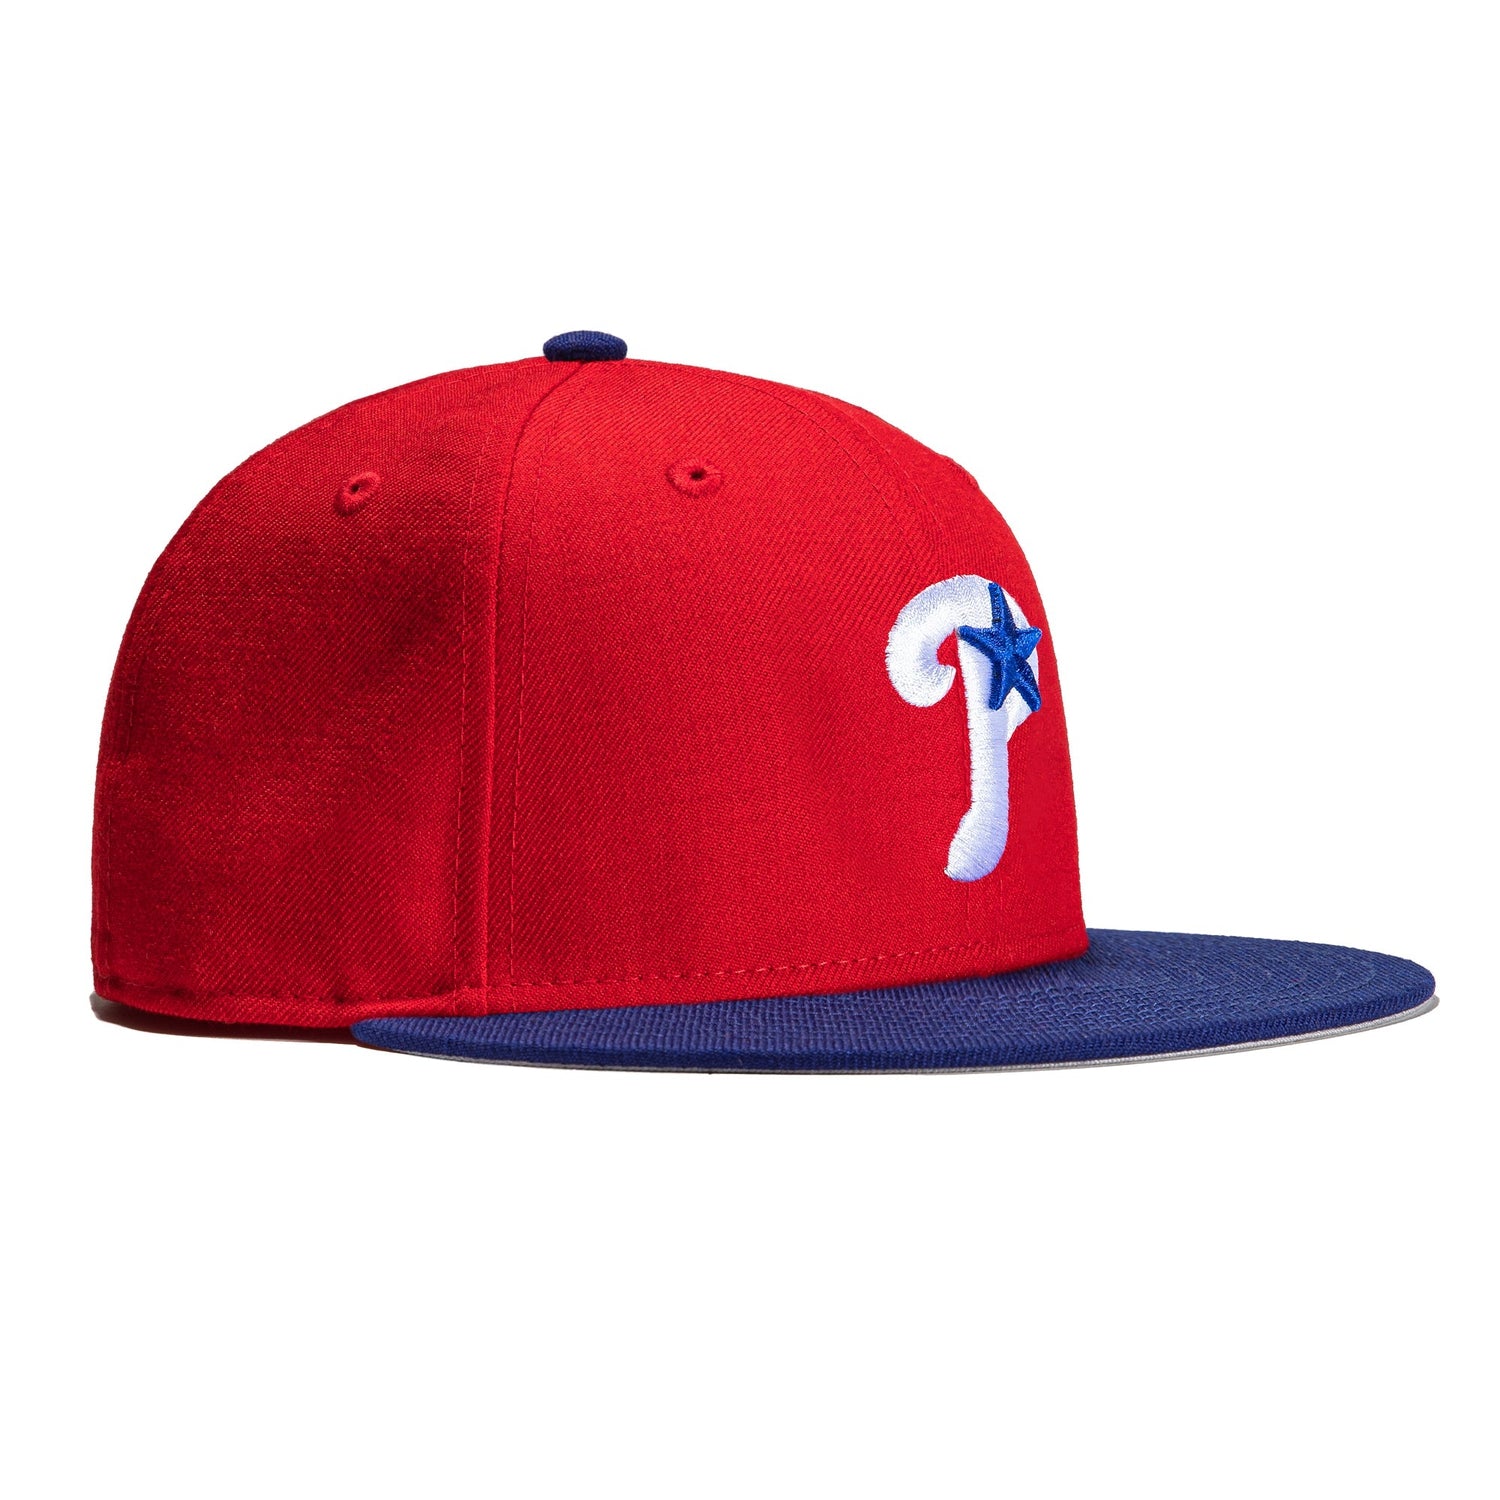 MLB Philadelphia Phillies Light Royal with White 59FIFTY Fitted Cap